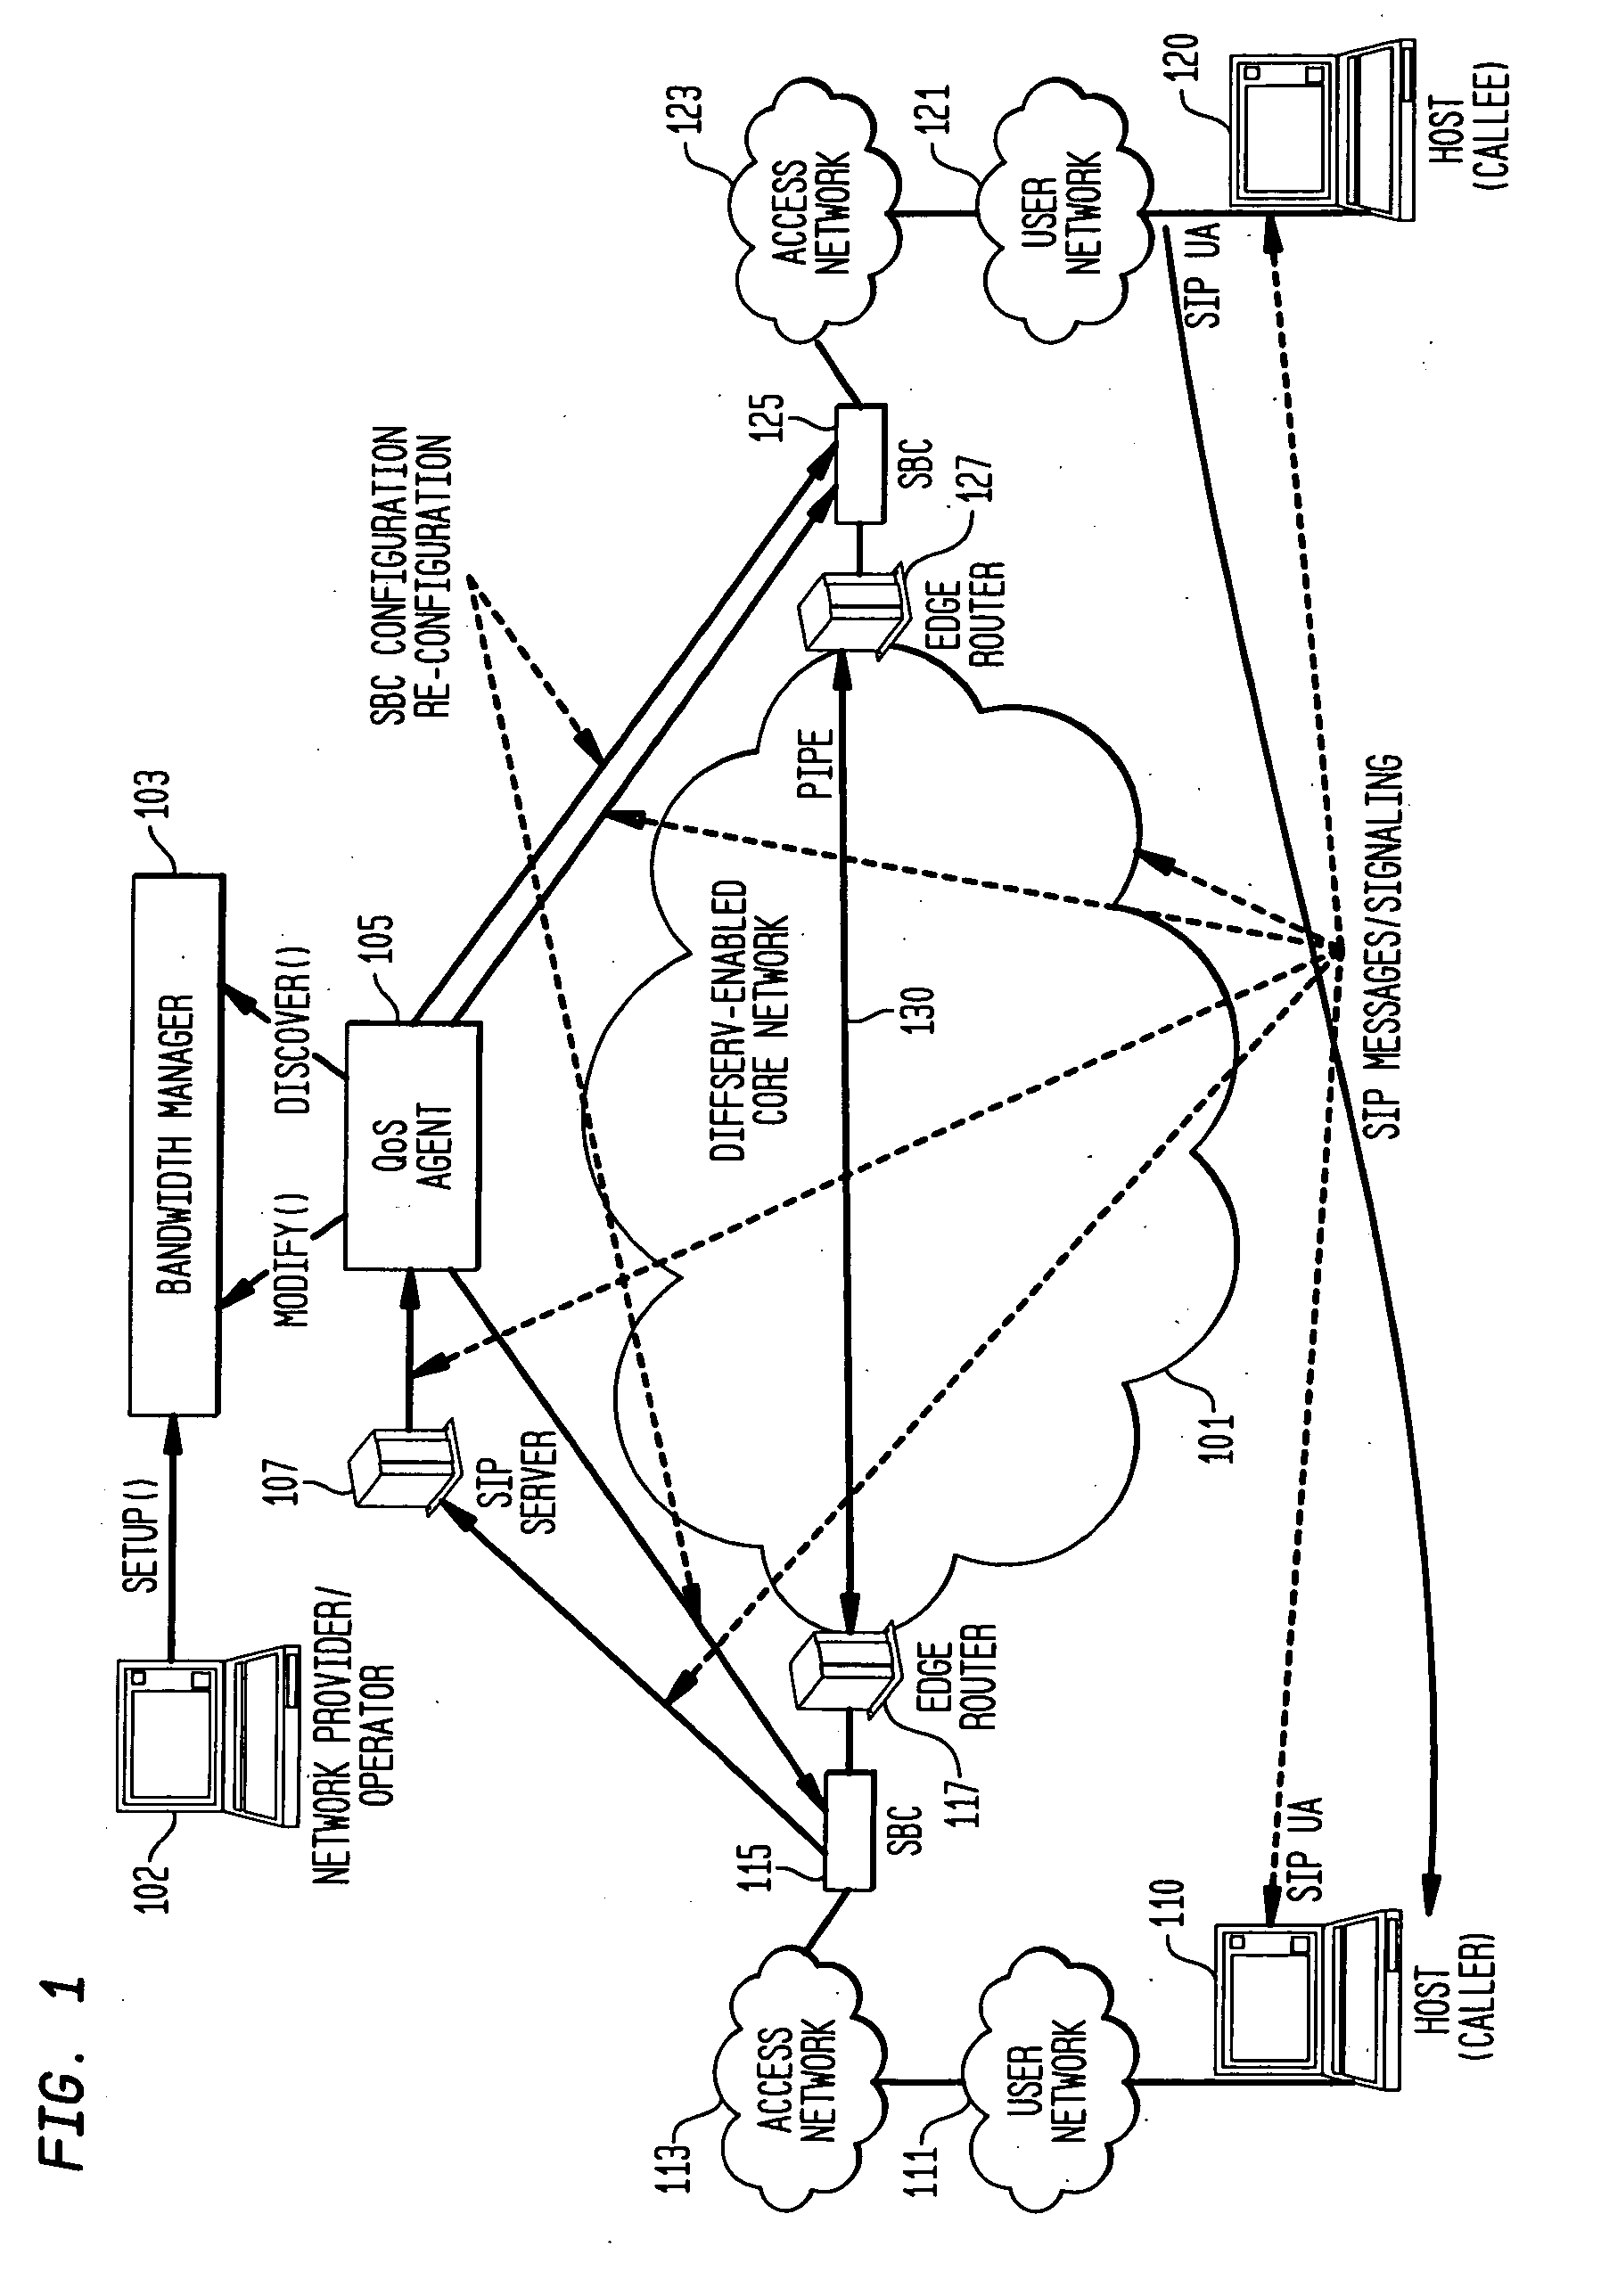 Systems and Methods for QoS Provisioning and Assurance for Point-to-Point SIP Sessions in DiffServ-enabled MPLS Networks